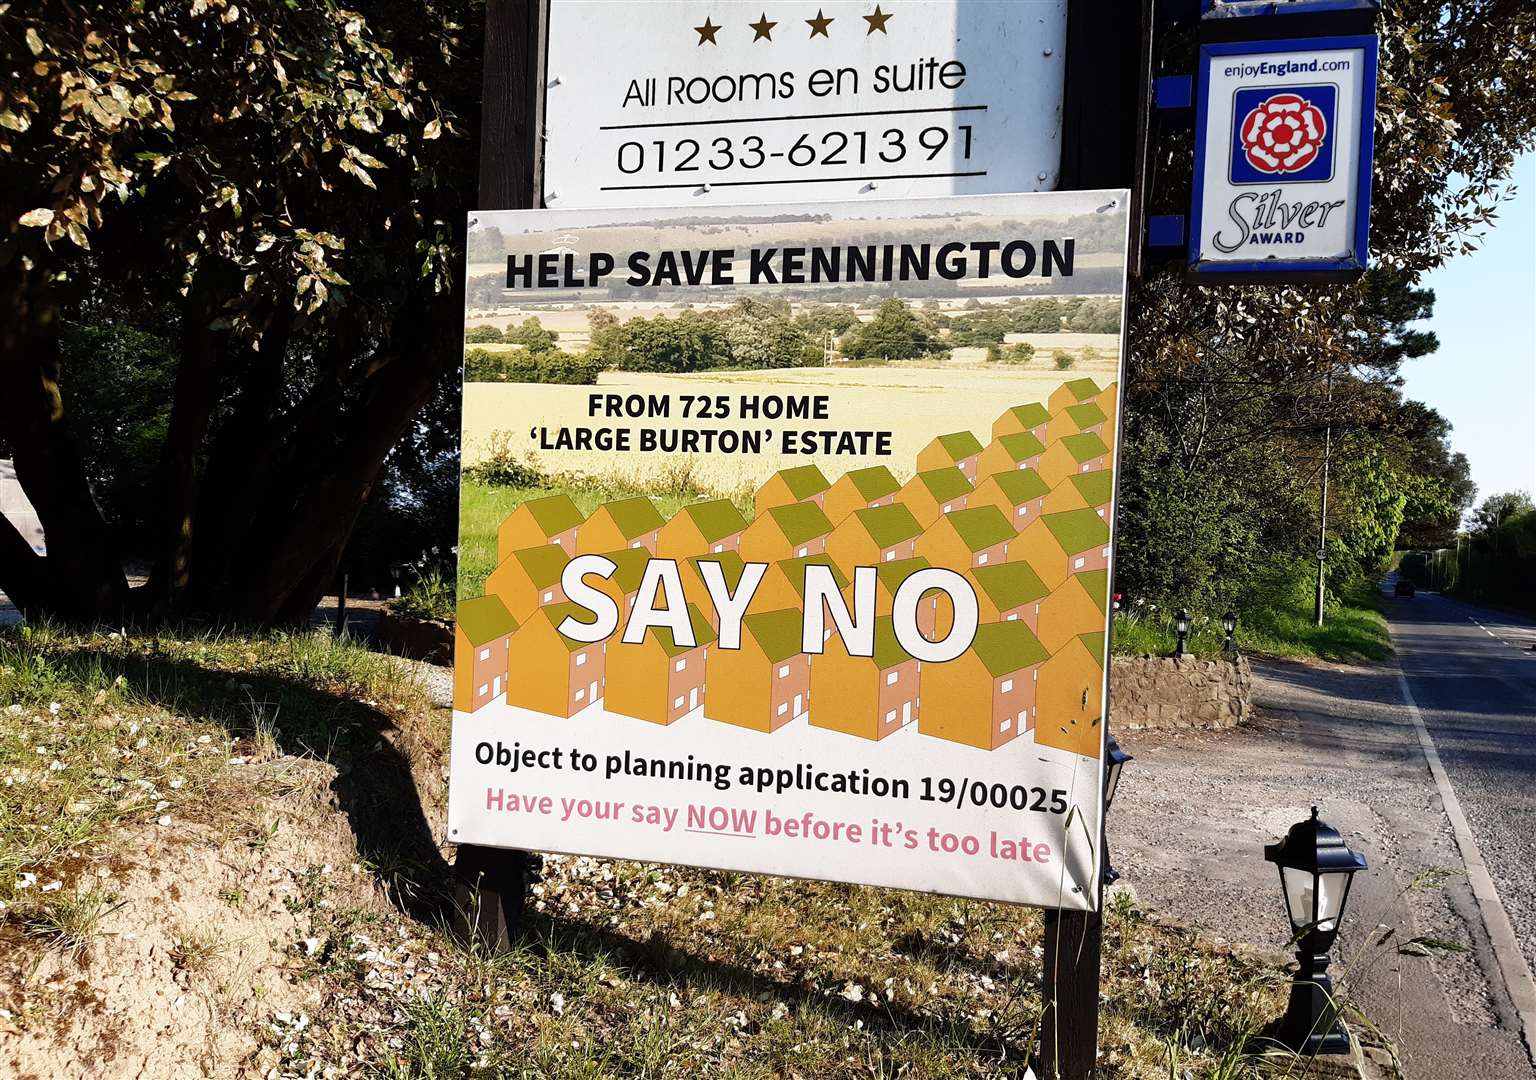 The highly controversial scheme is facing huge opposition from residents